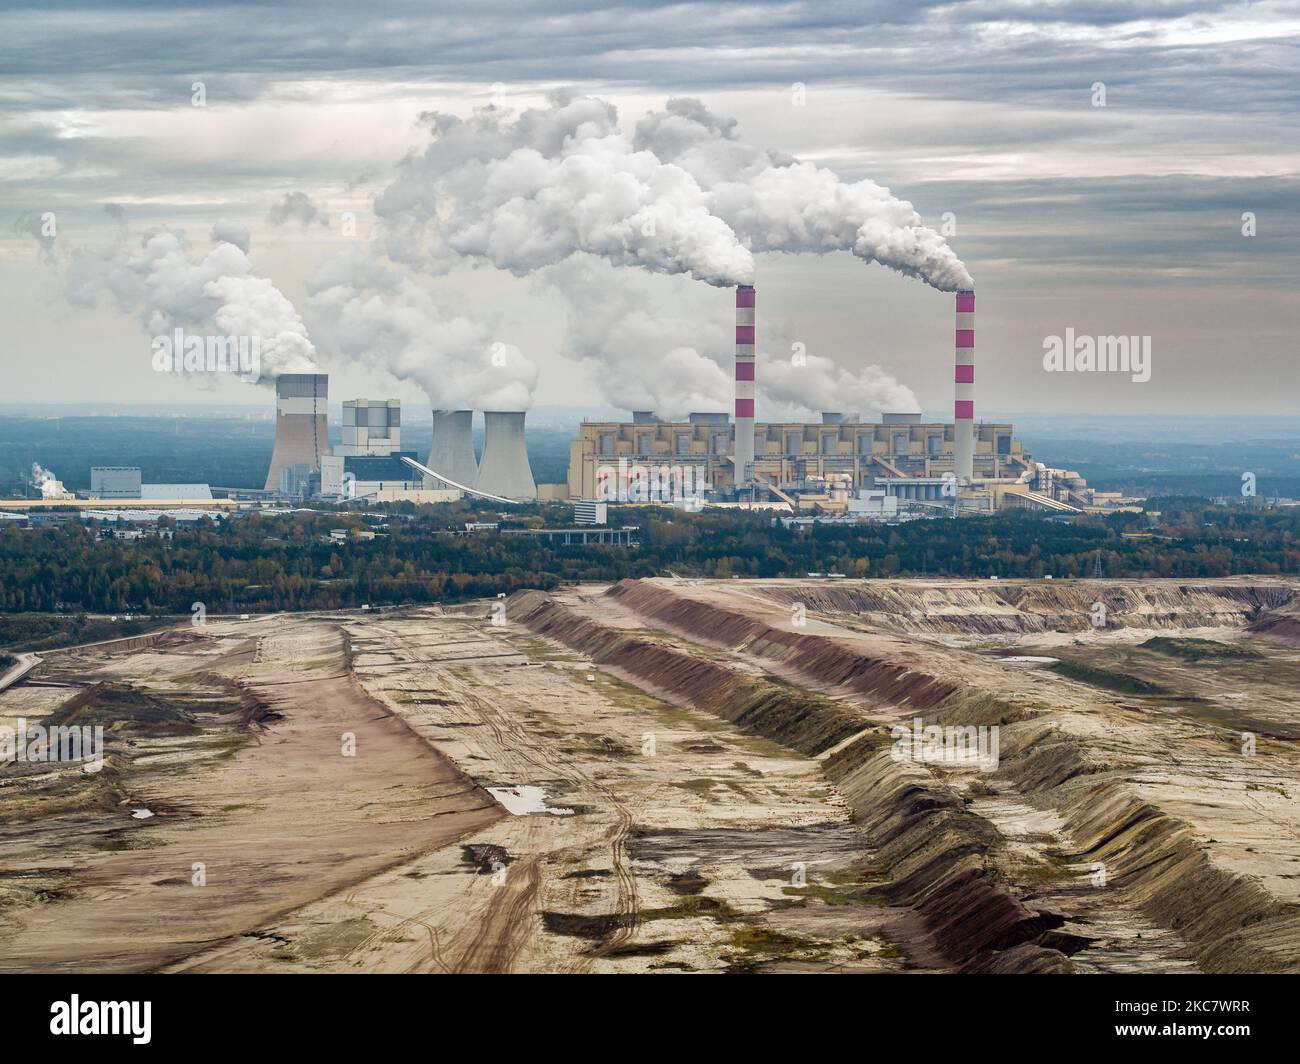 Aerial view of power plant and open-cast coal mine in Belchatow under moody cloudy sky, Poland Stock Photo